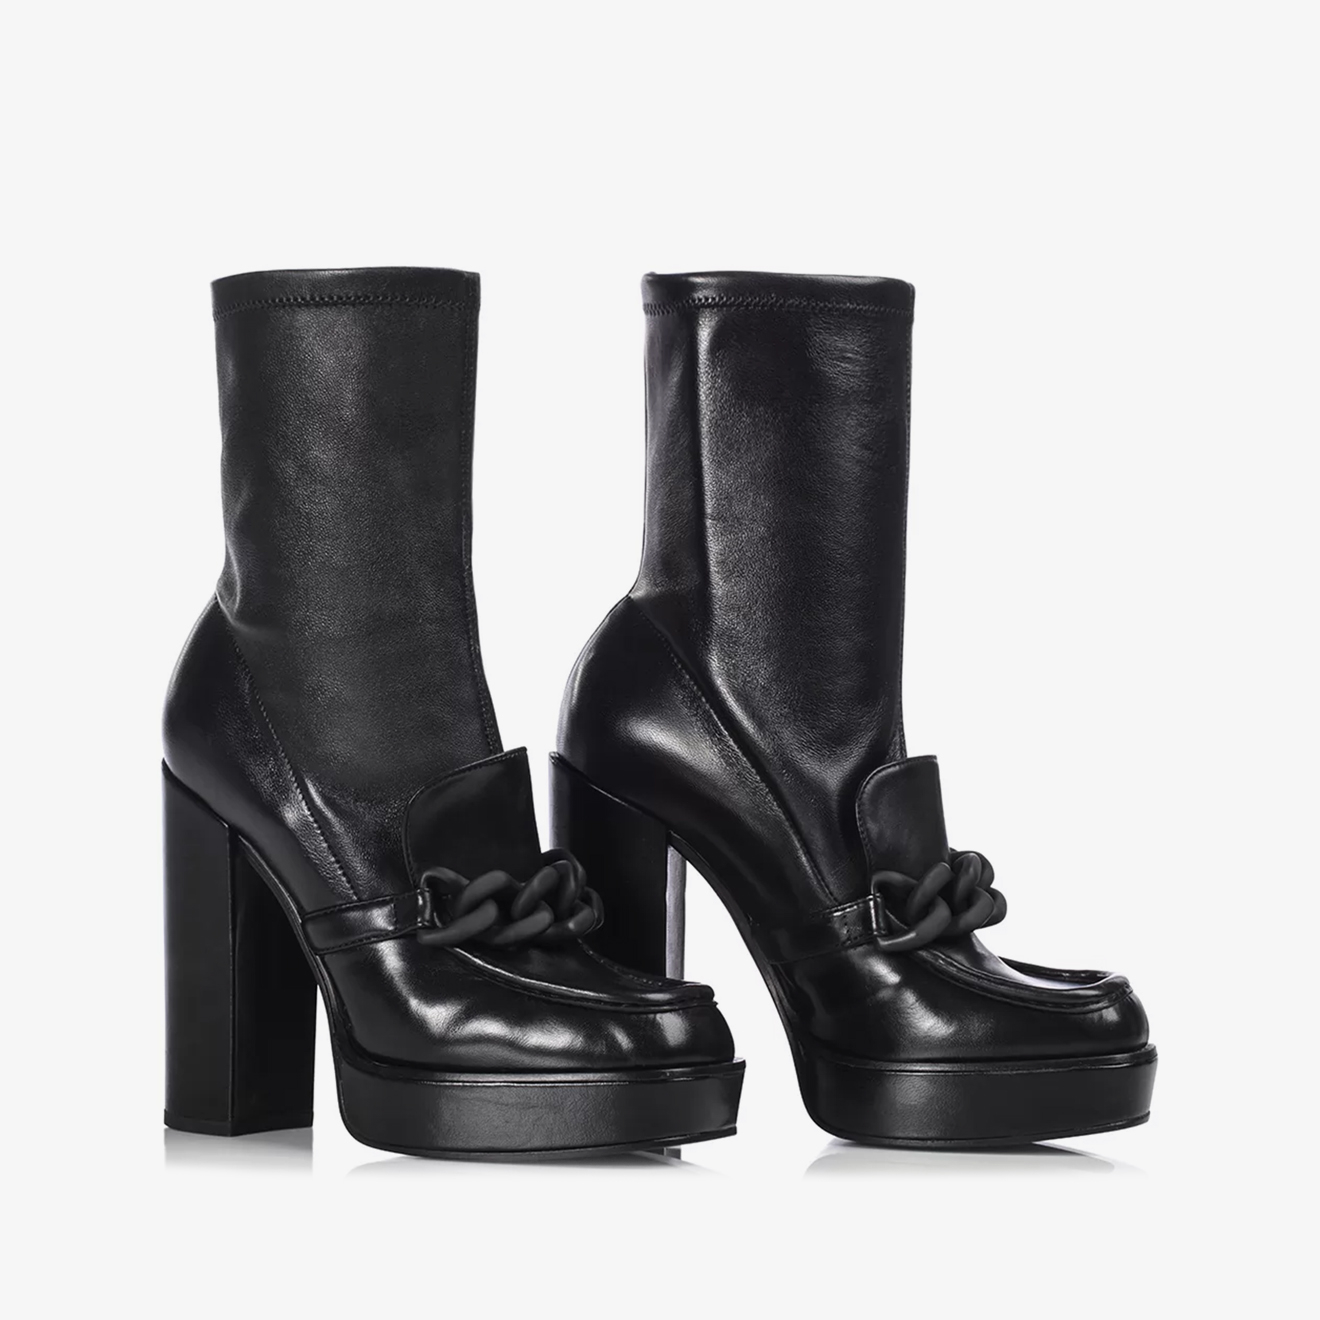 LANA ANKLE BOOT 130 mm - Le Silla official outlet